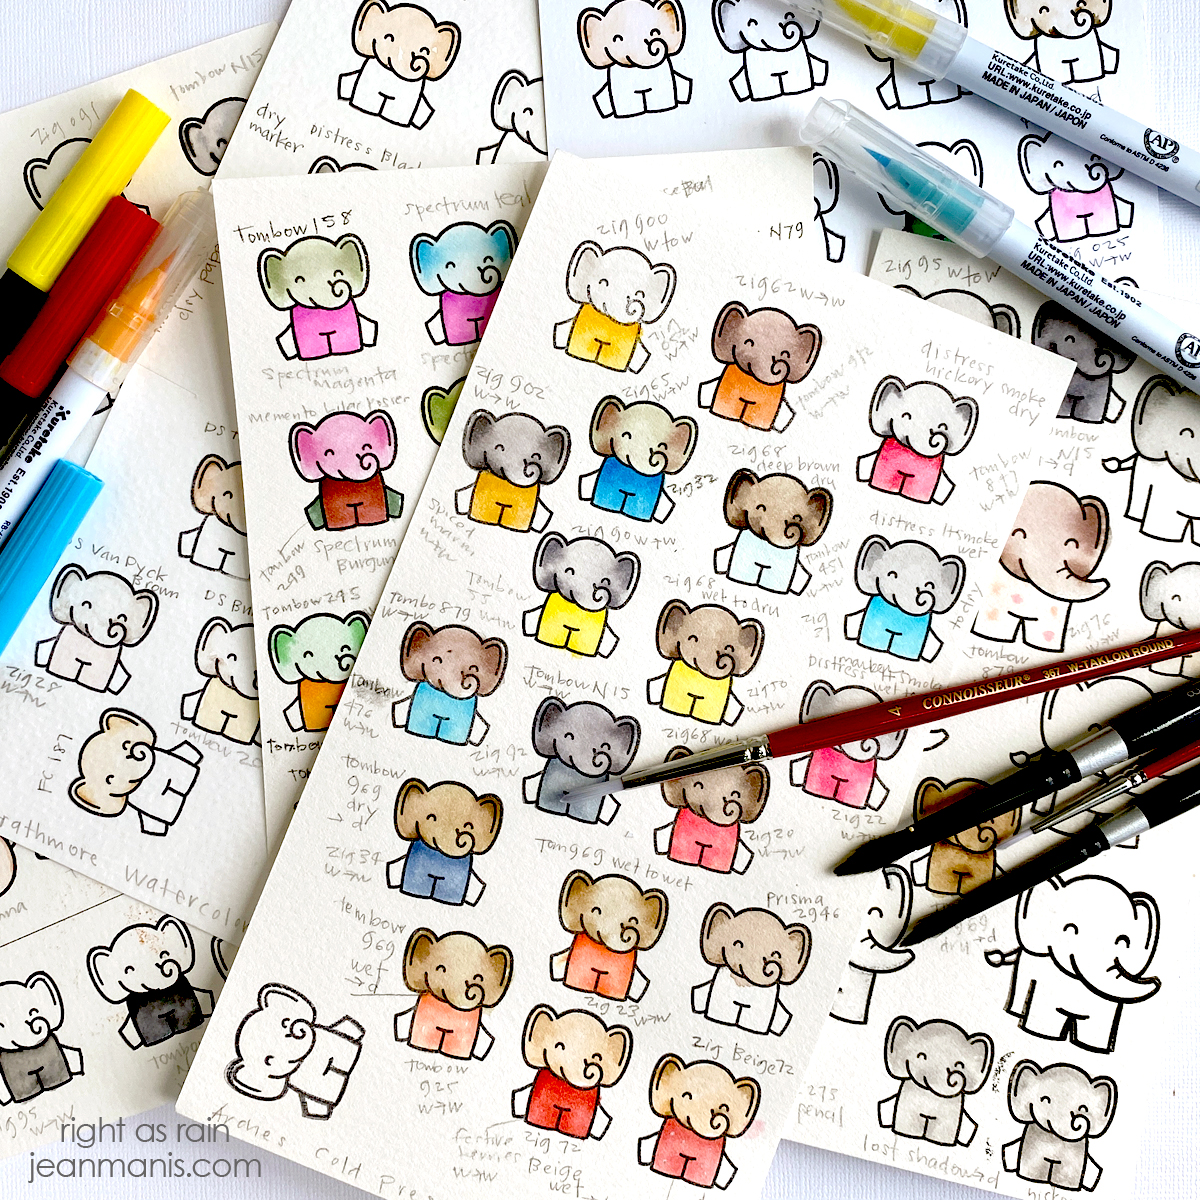 Resources for Watercoloring Stamped Images